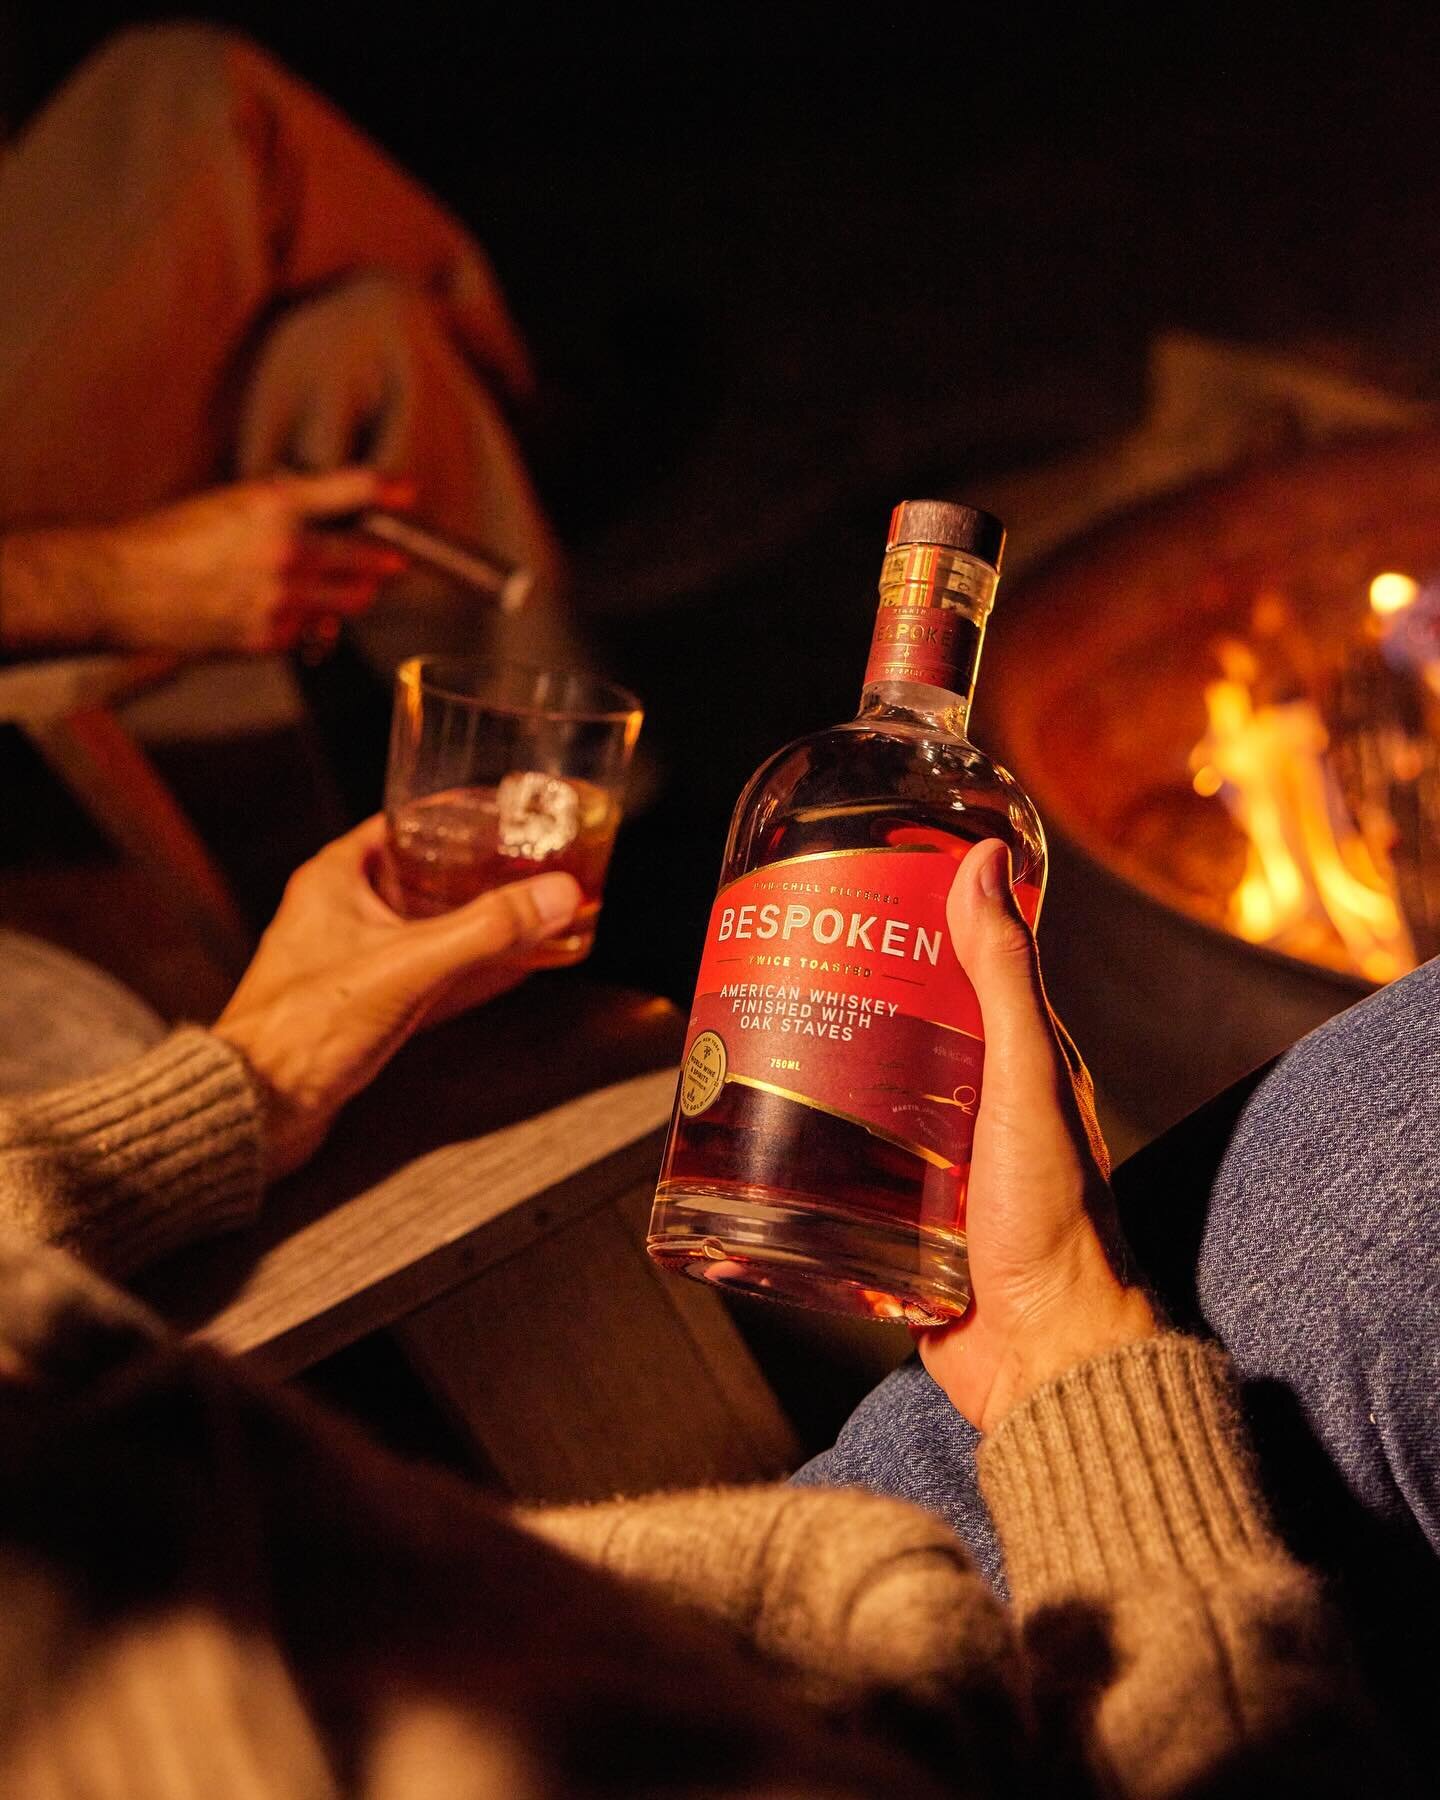 Let the warmth of Bespoken&rsquo;s American whiskey ignite the fire within 🔥